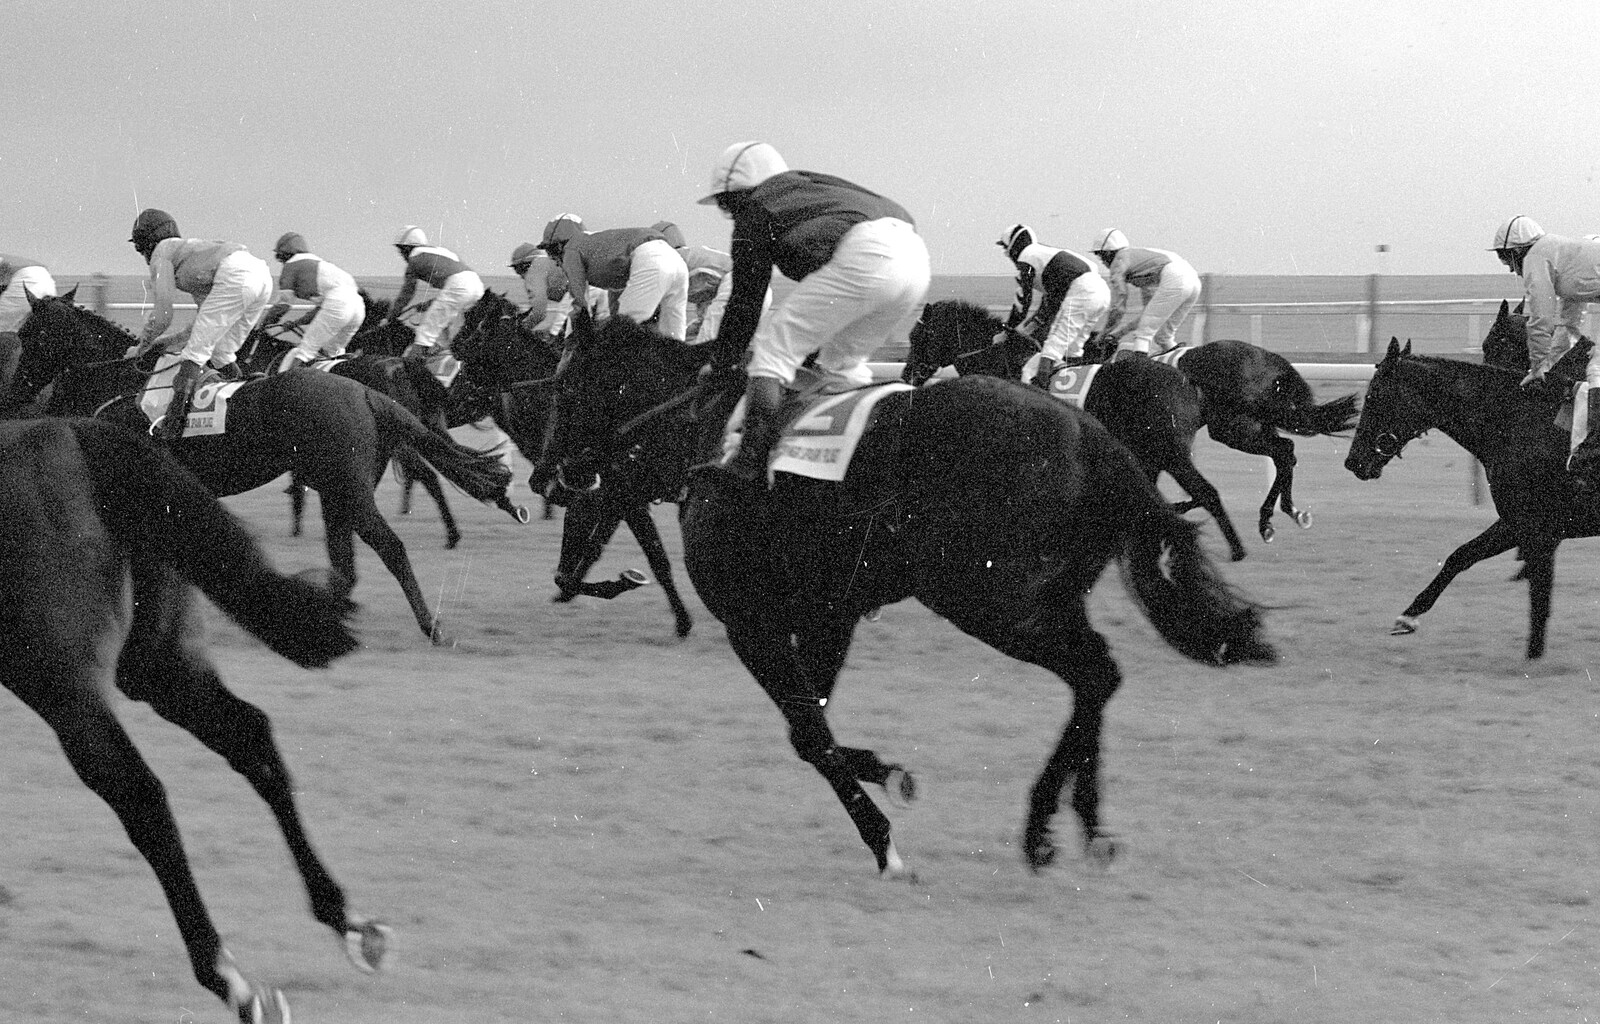 Horses gallop across the line from 3G Lab Goes to the Races, Newmarket, Suffolk - 15th July 2001